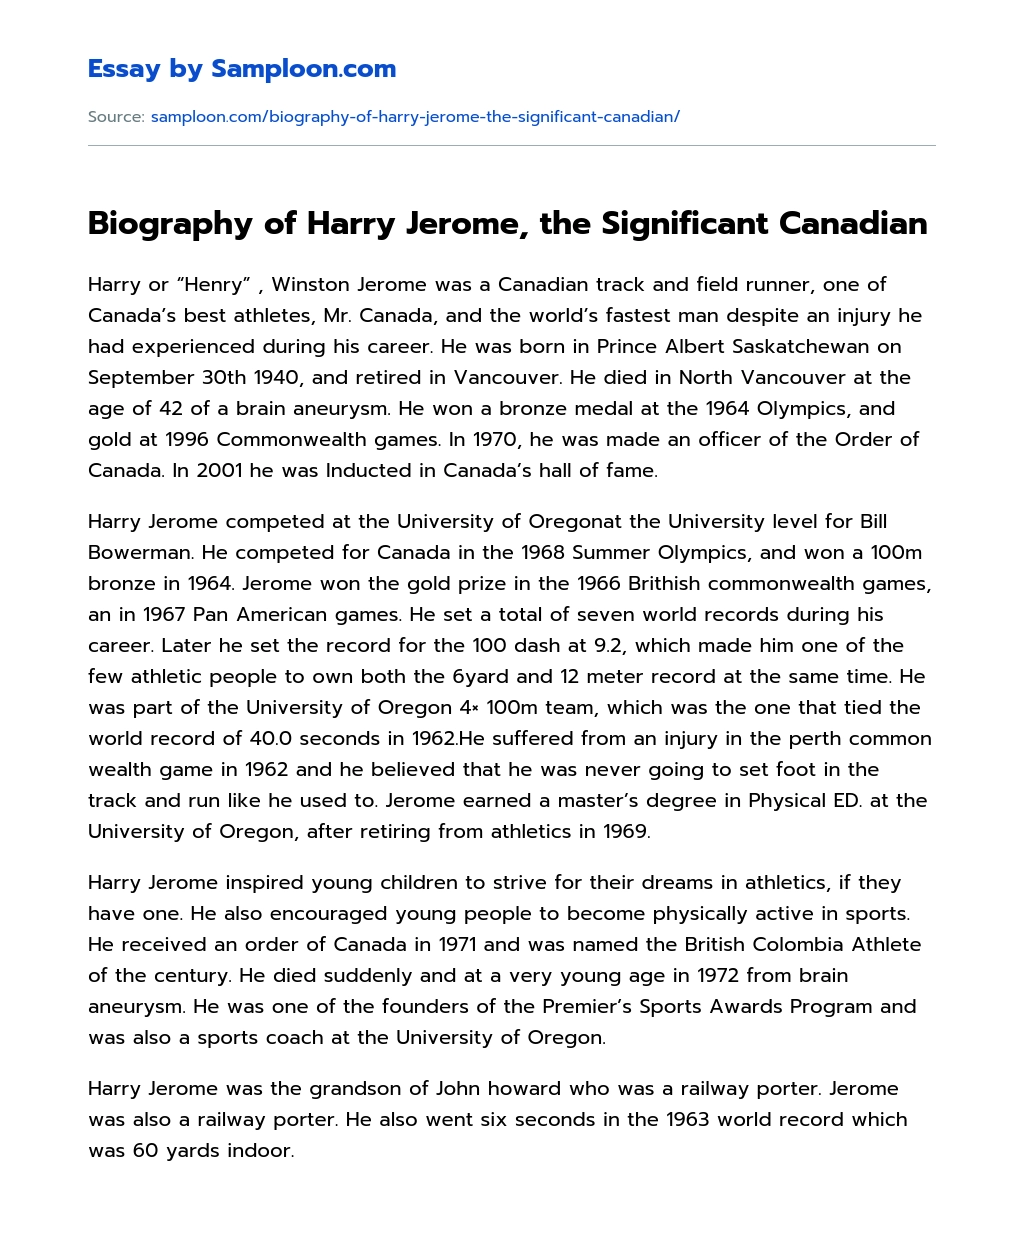 Biography of Harry Jerome, the Significant Canadian essay